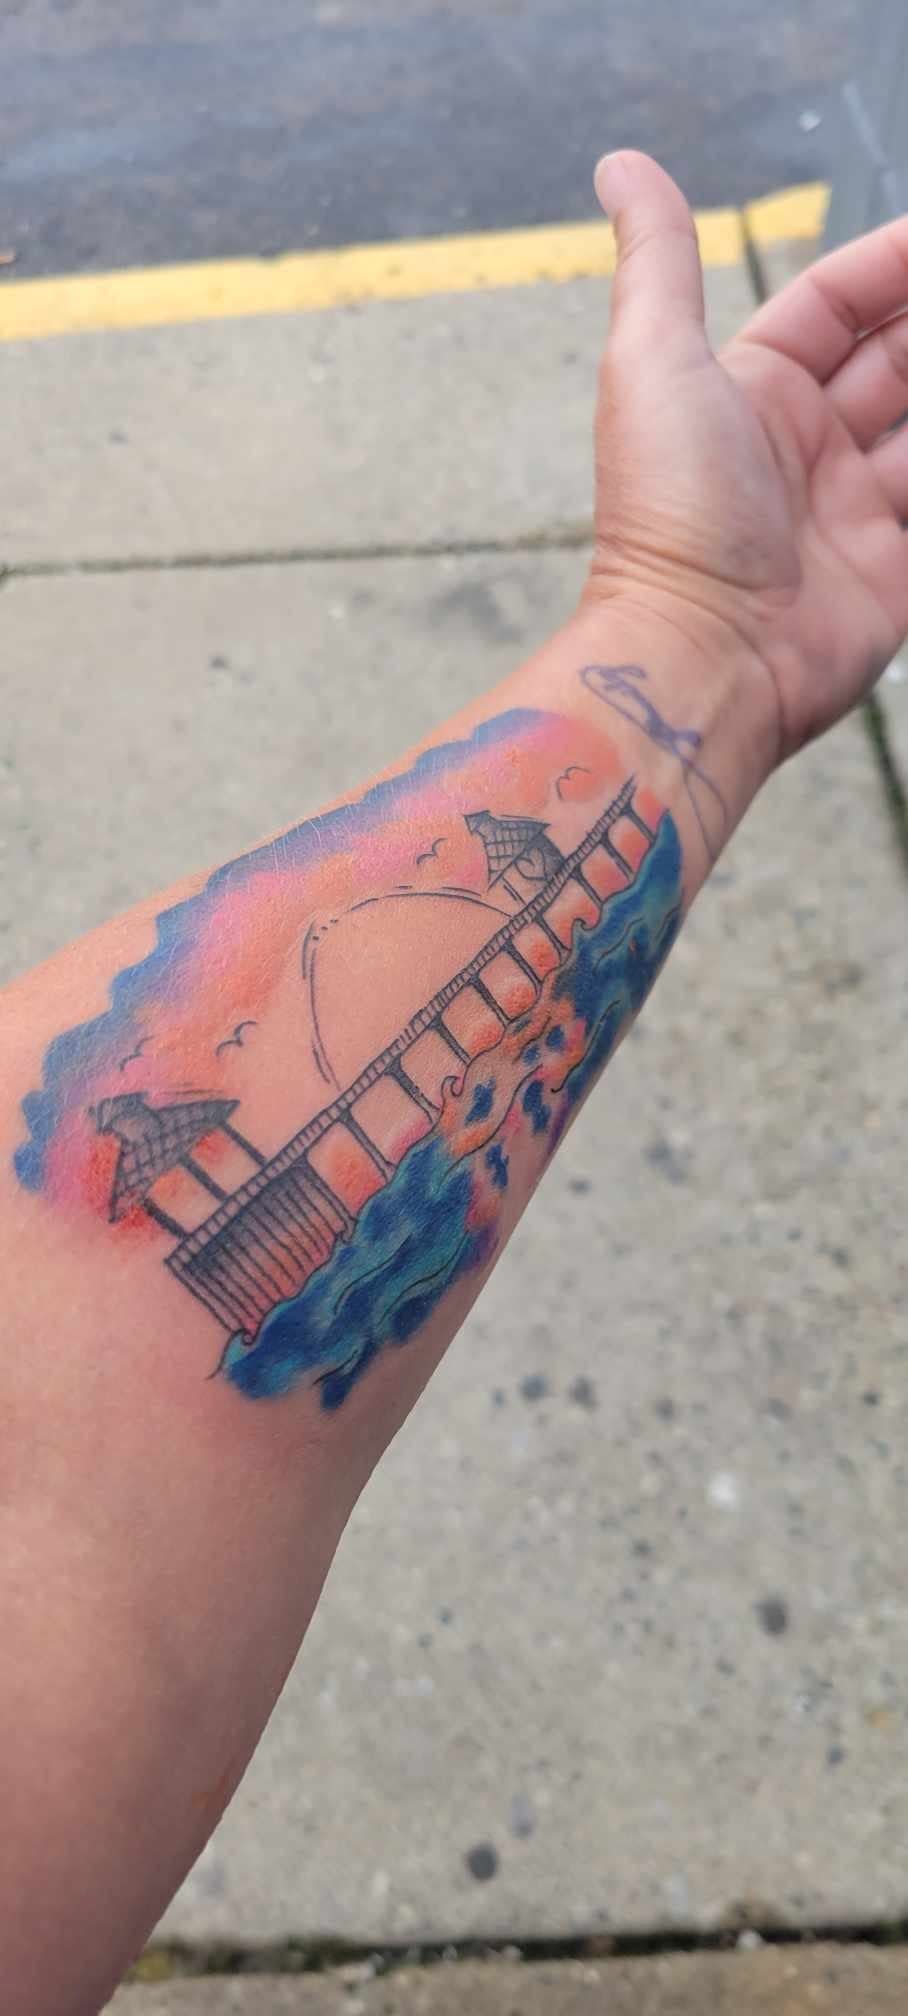 This is a "work in progress" unfinished version of the Fort Myers Beach pier on the left arm of Tracy Wilson Deryckere.